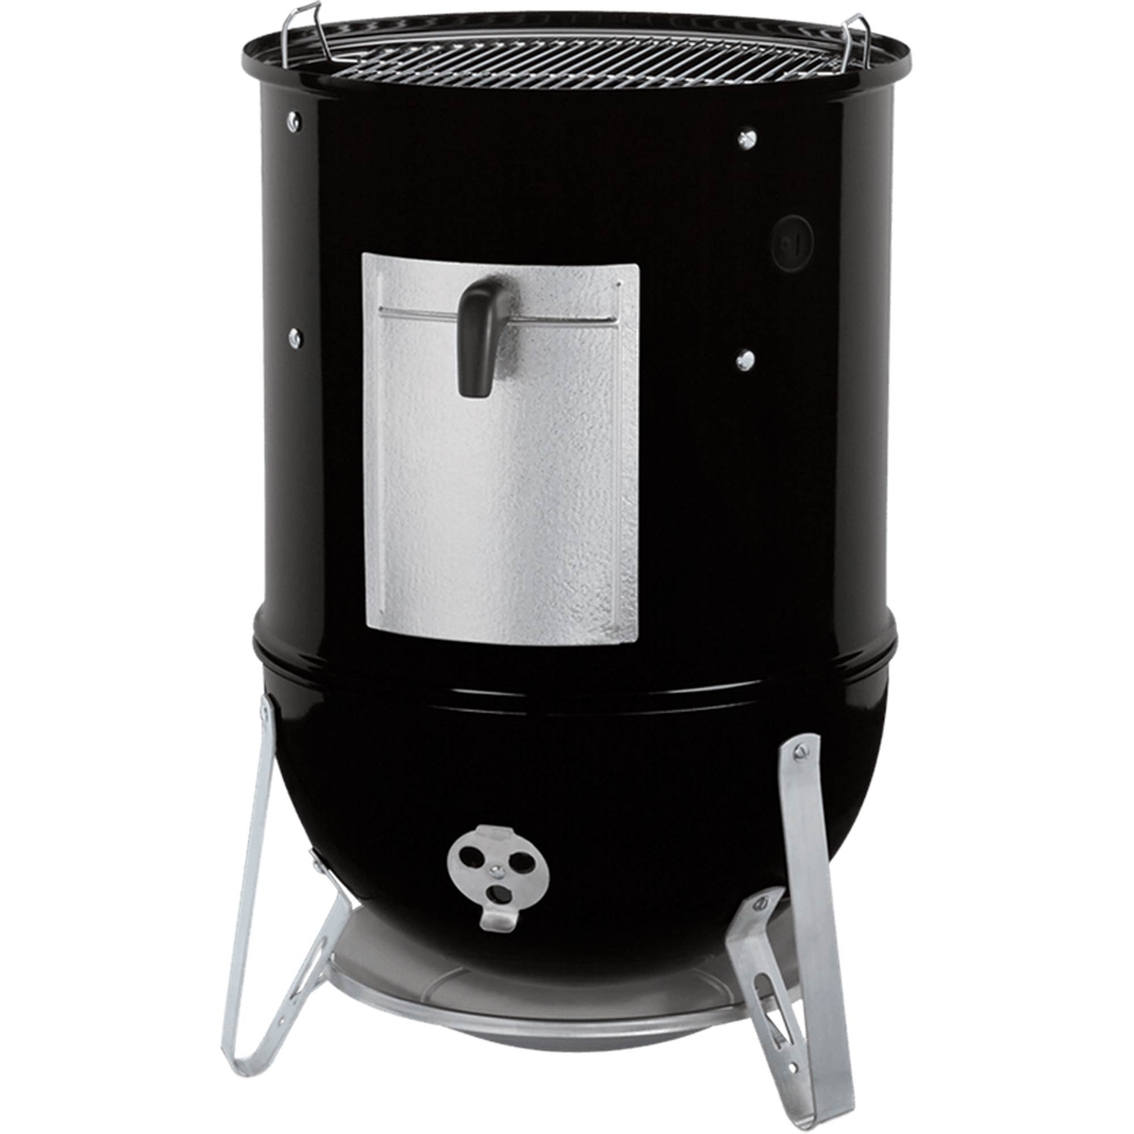 Weber Smokey Mountain Cooker and Smoker 18.5 in. - Image 2 of 3